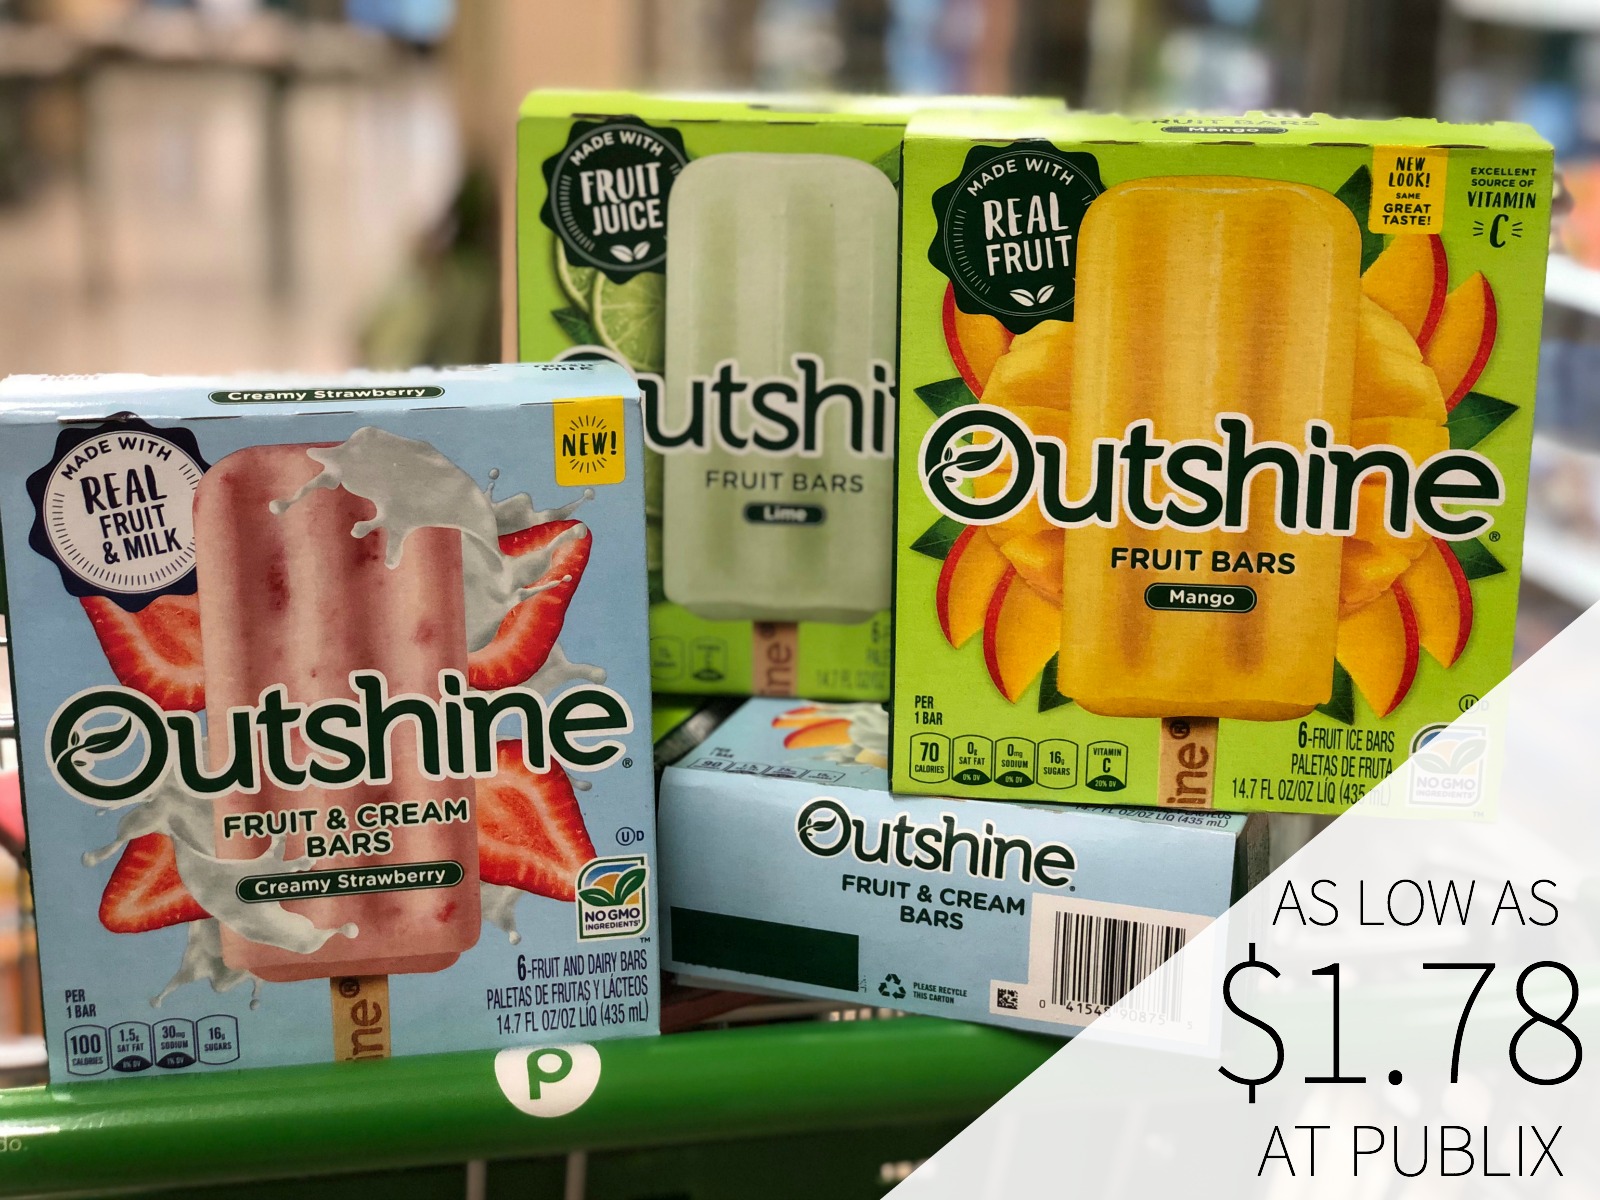 Perfect Week To Earn Your Publix Gift Card in  The Have Happy On Hand Reward Offer (BOGO Sales On Häagen-Dazs & Outshine Bars!)